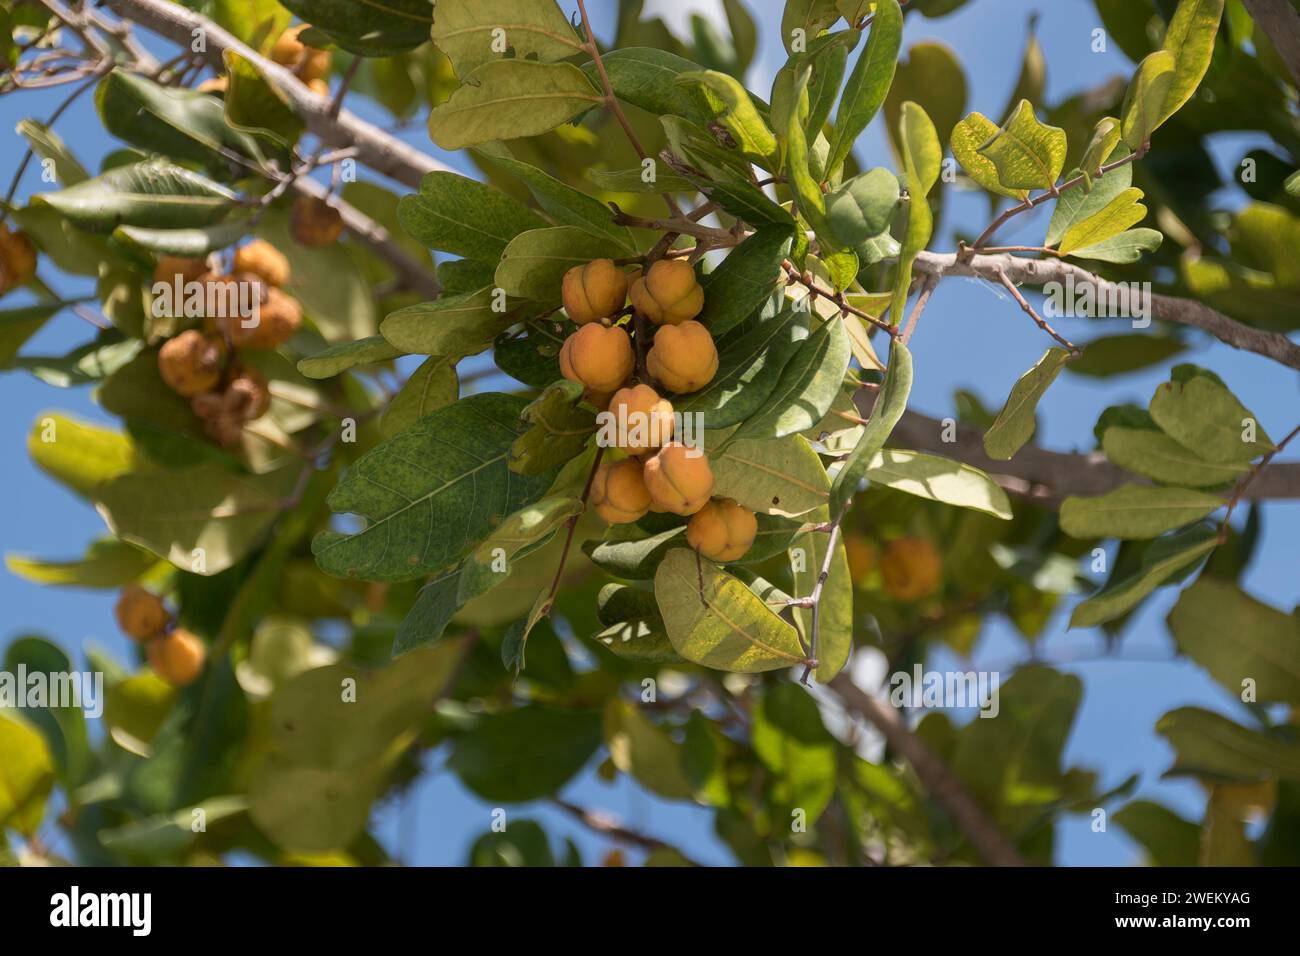 Spherical orange seed pods of Australian Tuckeroo tree, Cupaniopsis anacardioides, in SE Queensland. Hardy , small tree used in car parks and gardens. Stock Photo